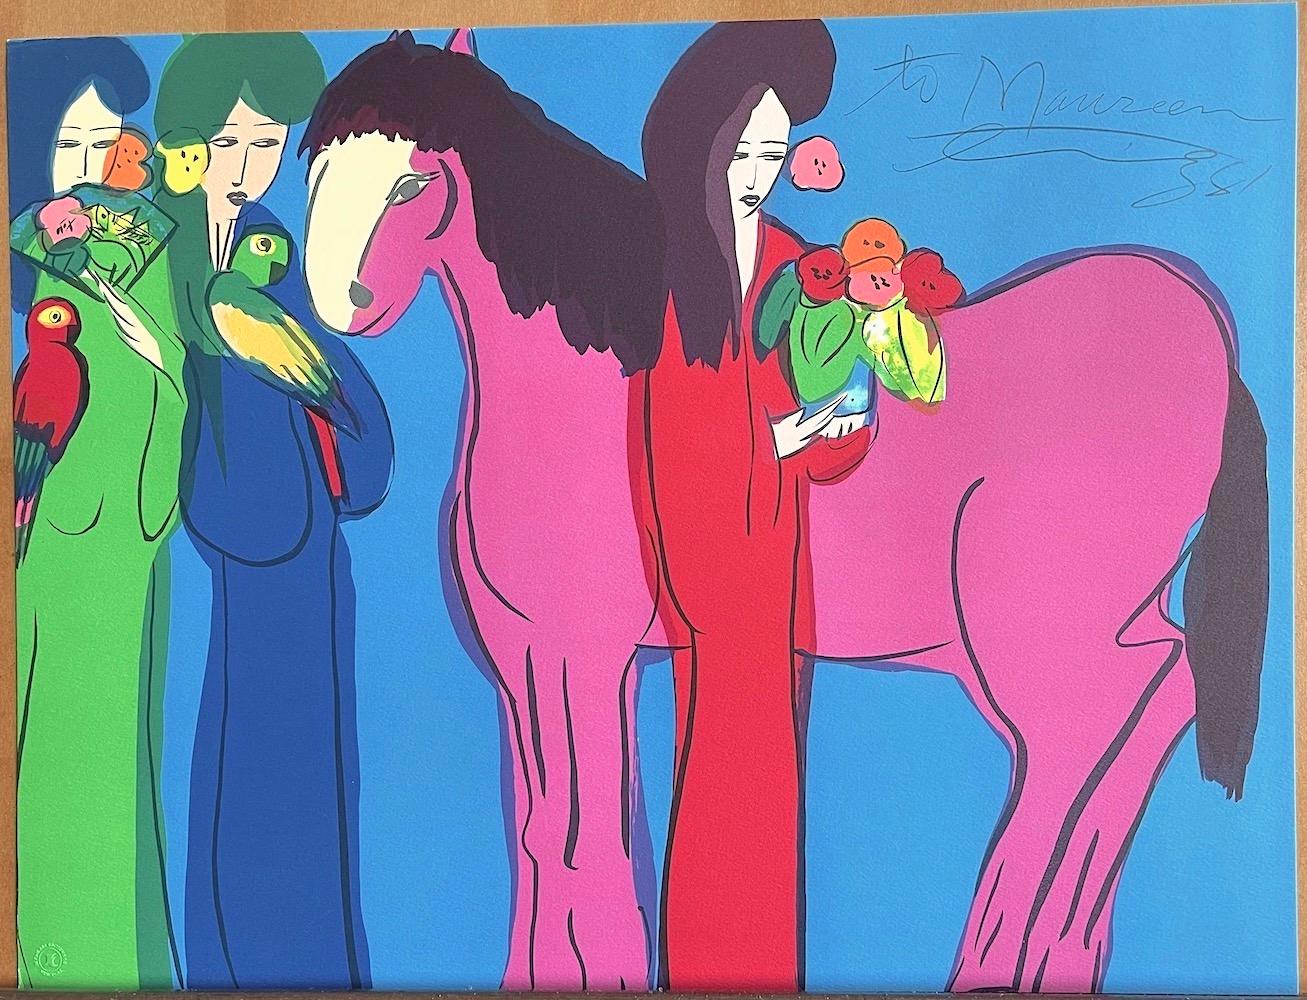 MAGENTA HORSE, THREE GEISHAS Signed Lithograph, Asian Women, Horse, Parrots - Contemporary Print by Walasse Ting